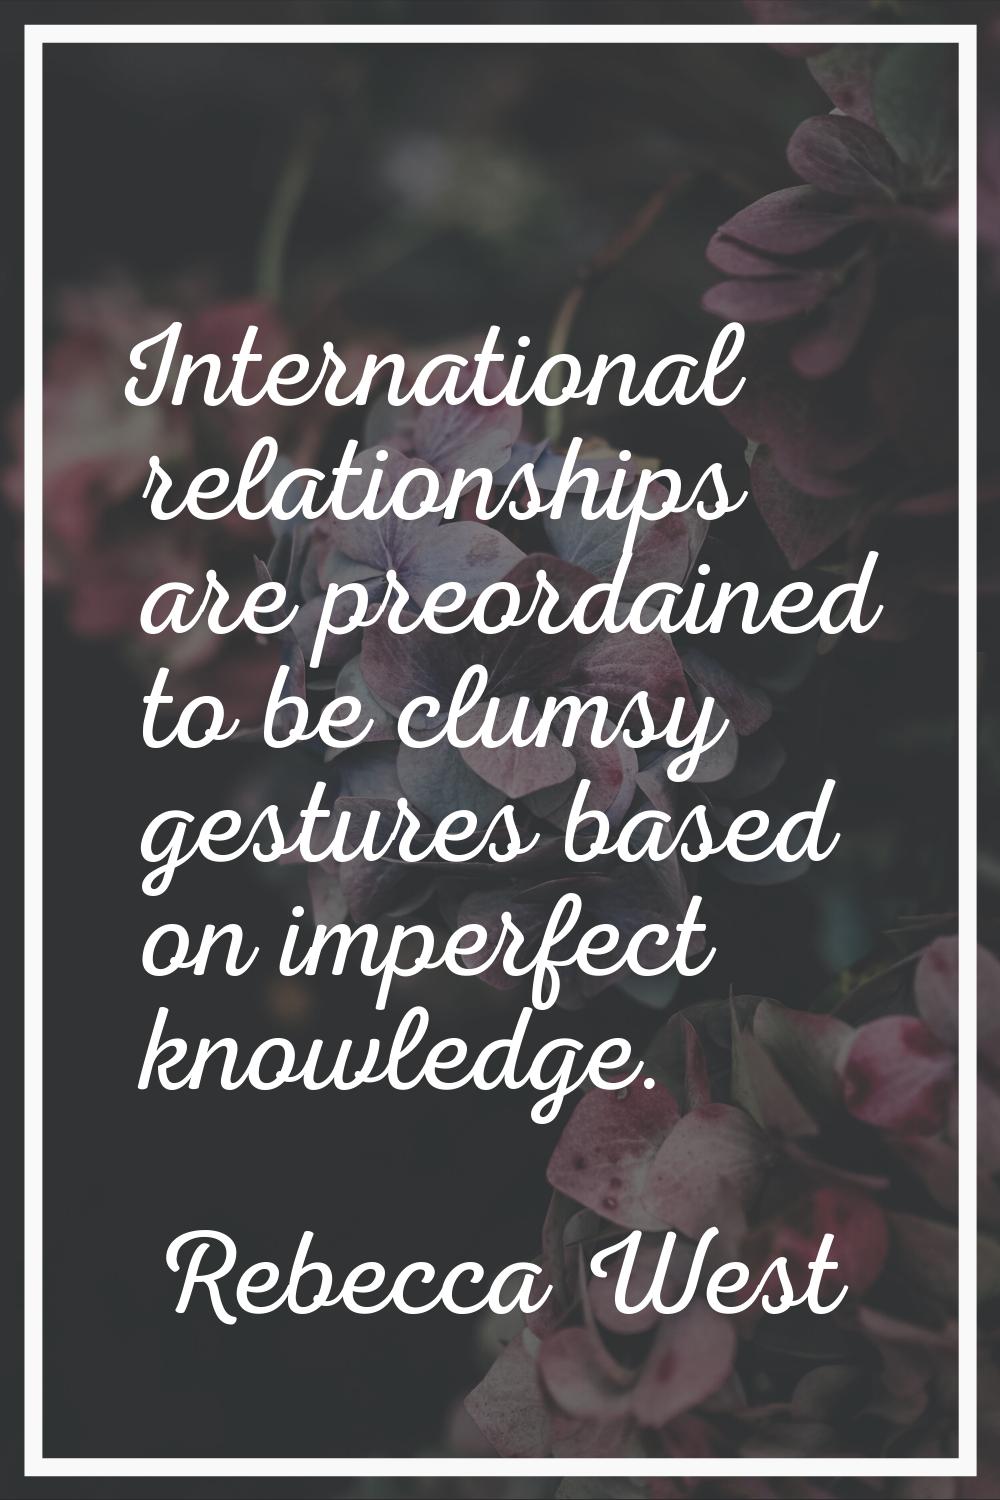 International relationships are preordained to be clumsy gestures based on imperfect knowledge.